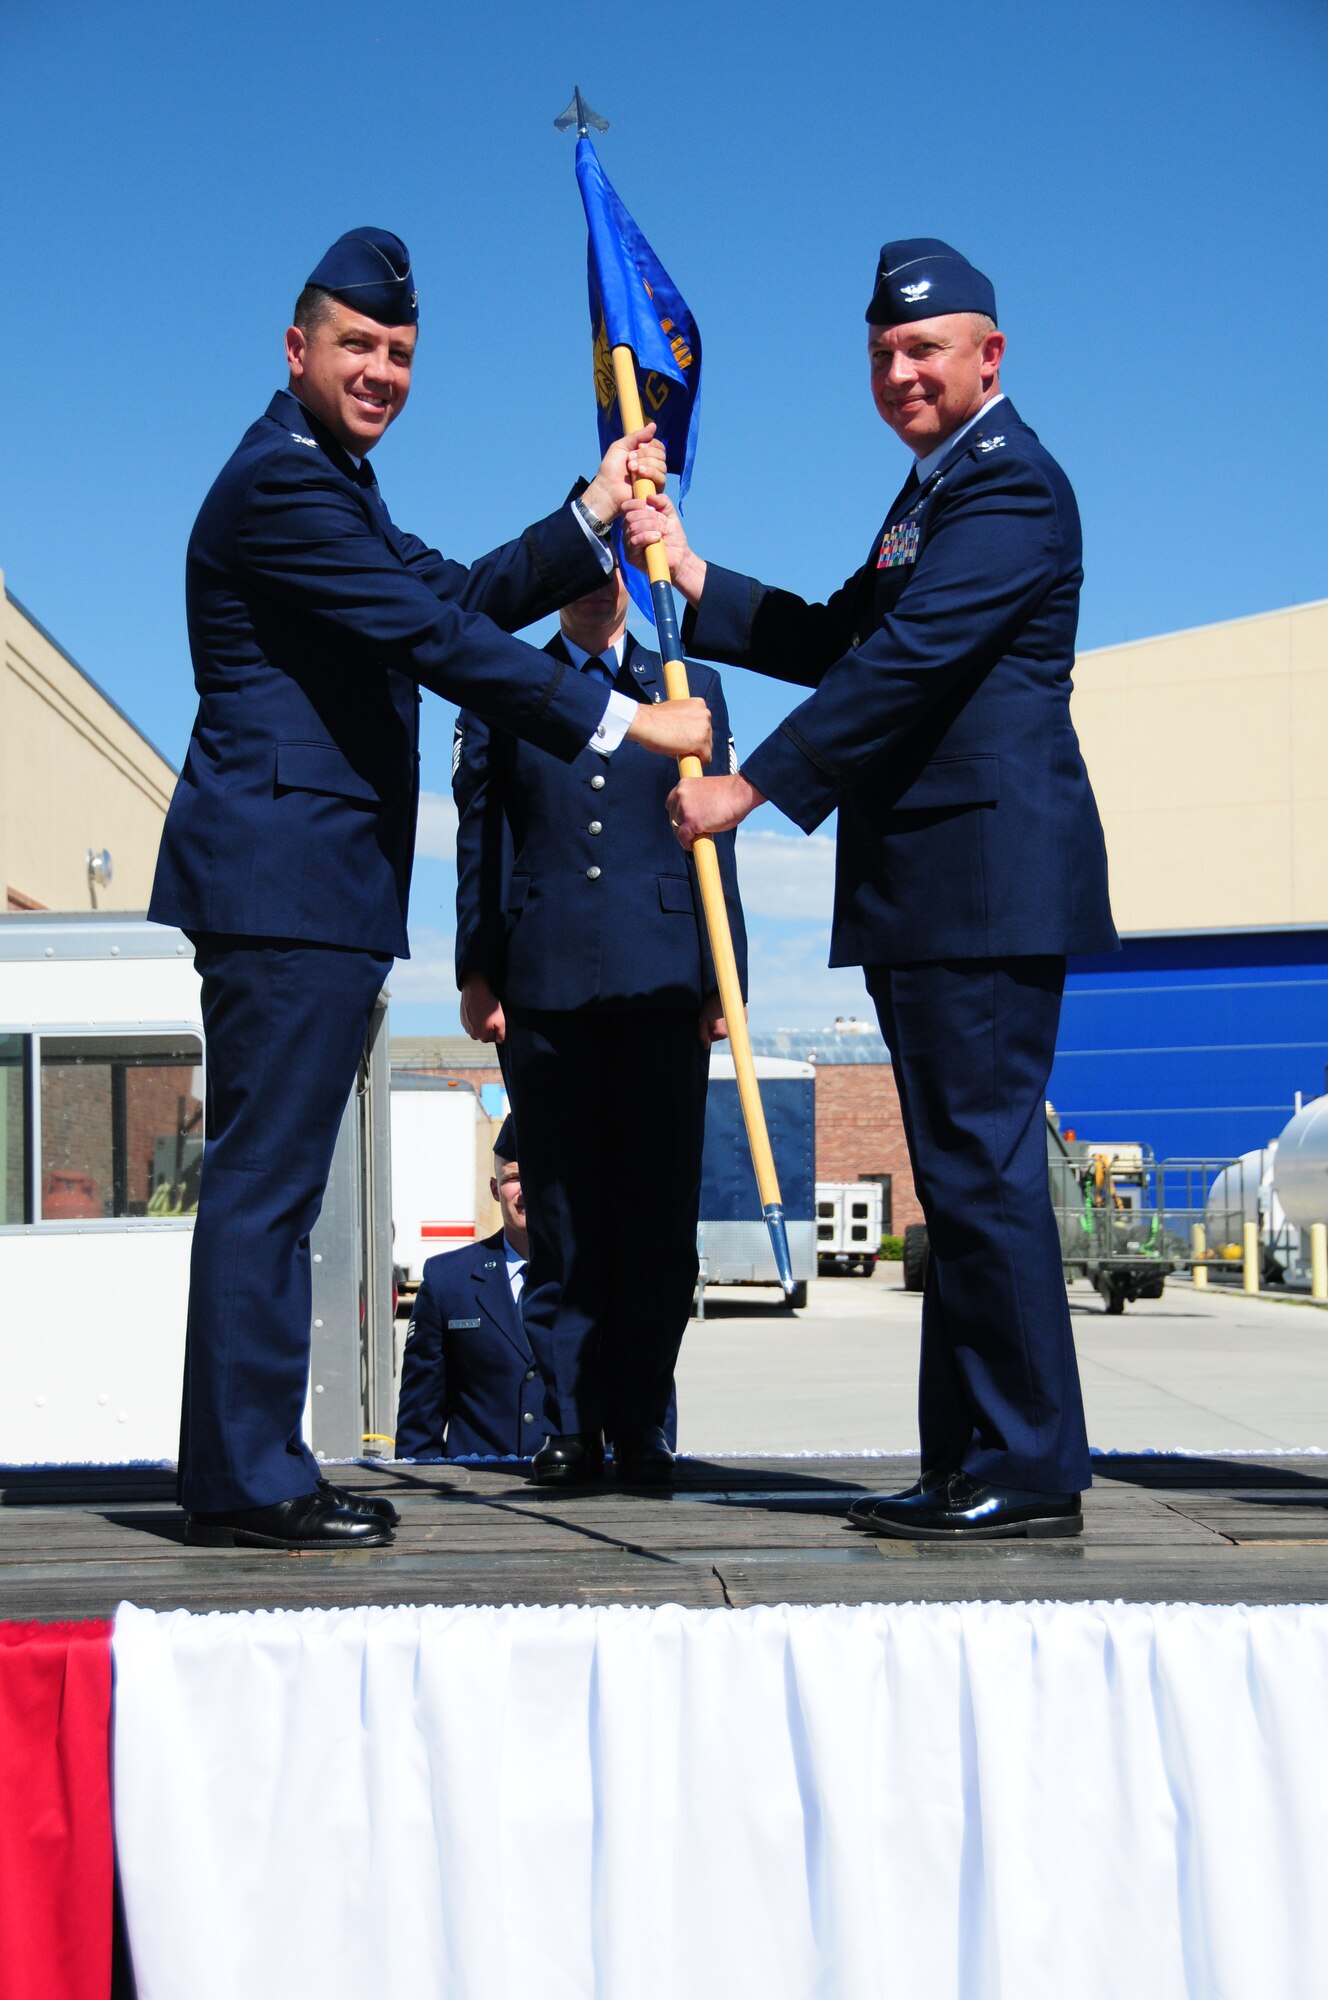 Col. Peter L. "Pete" Linde, right, accepts command of the 153rd Maintenance Group from Col. Michael R. Taheri, 153rd Airlift Wing commander, during a ceremony Aug. 4, 2013 at the Wyoming Air National Guard Base, Cheyenne, Wyo. The passing of the guidon is a symbolic gesture in front of an entire unit to witness a new leader assume their dutiful position. (U.S. Air National Guard photo by Capt. Rusty Ridley)